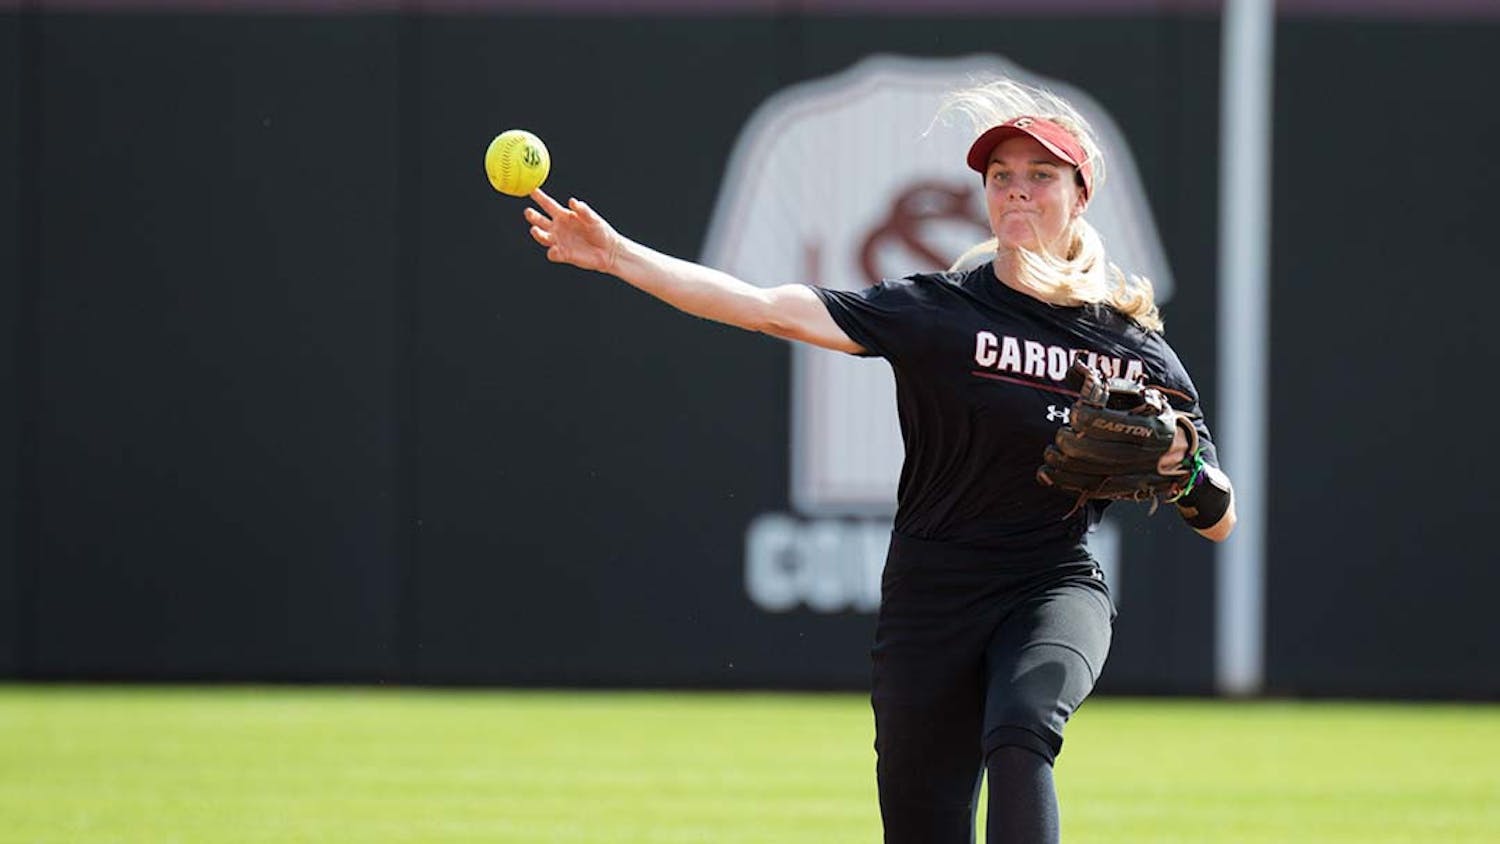 Junior infielder Riley Blampied throws the ball to first base after fielding a grounder in the Garnet and Black Scrimmage at Beckham Field on Nov. 5, 2022. Blampied only allowed 29 runs during the 2021-2022 season.